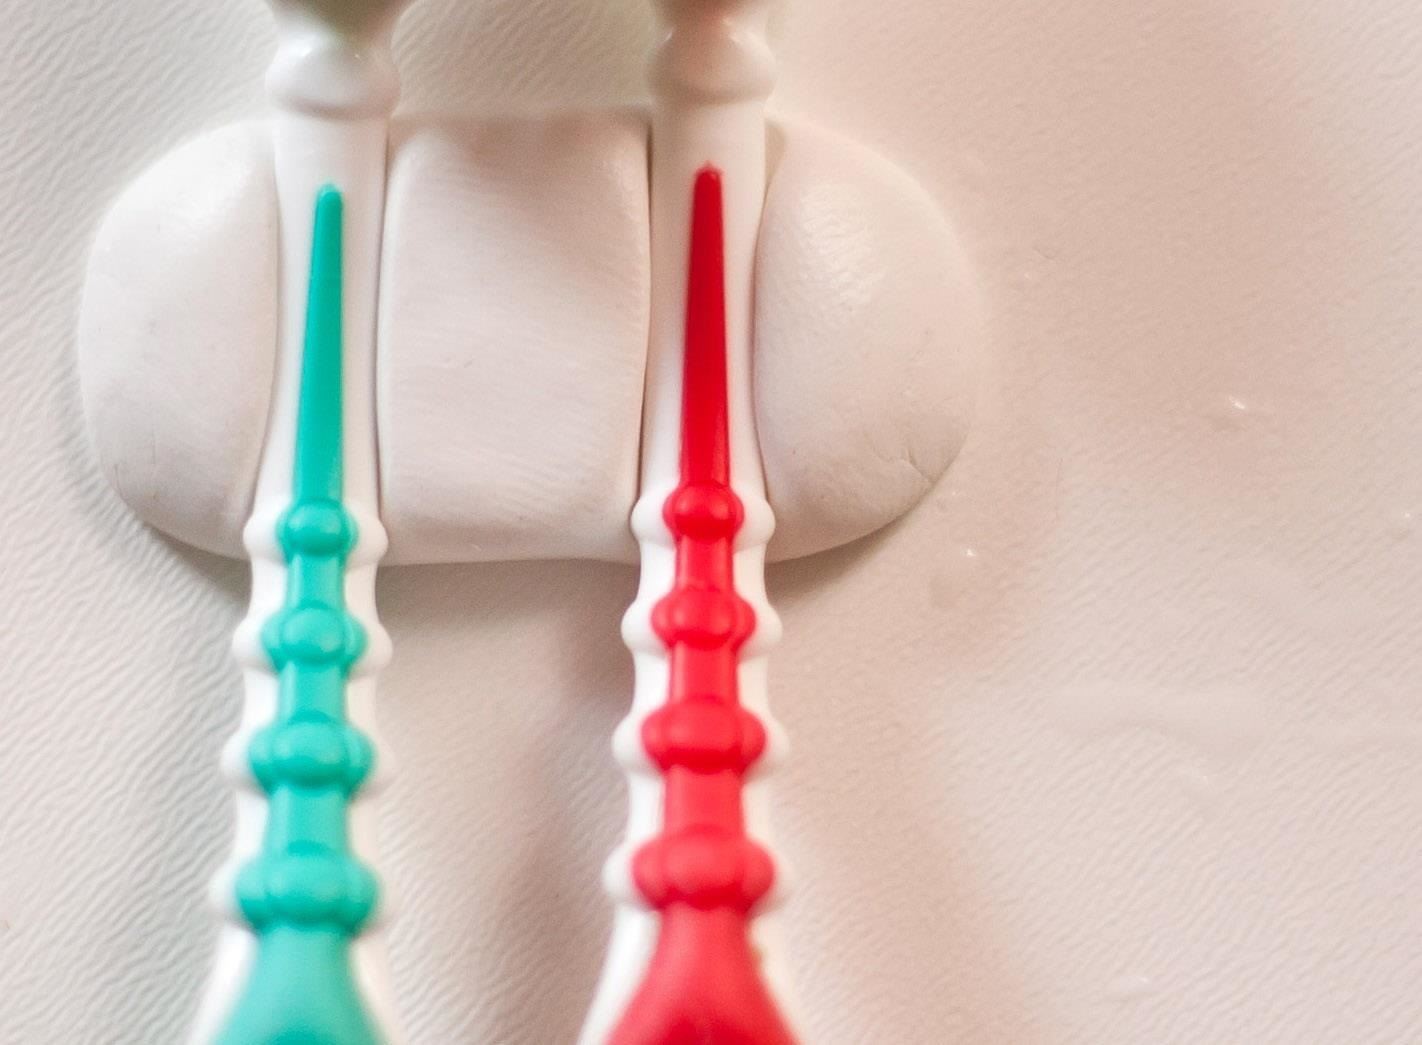 How to Make a Super Simple Toothbrush Holder and Declutter Your Bathroom Sink